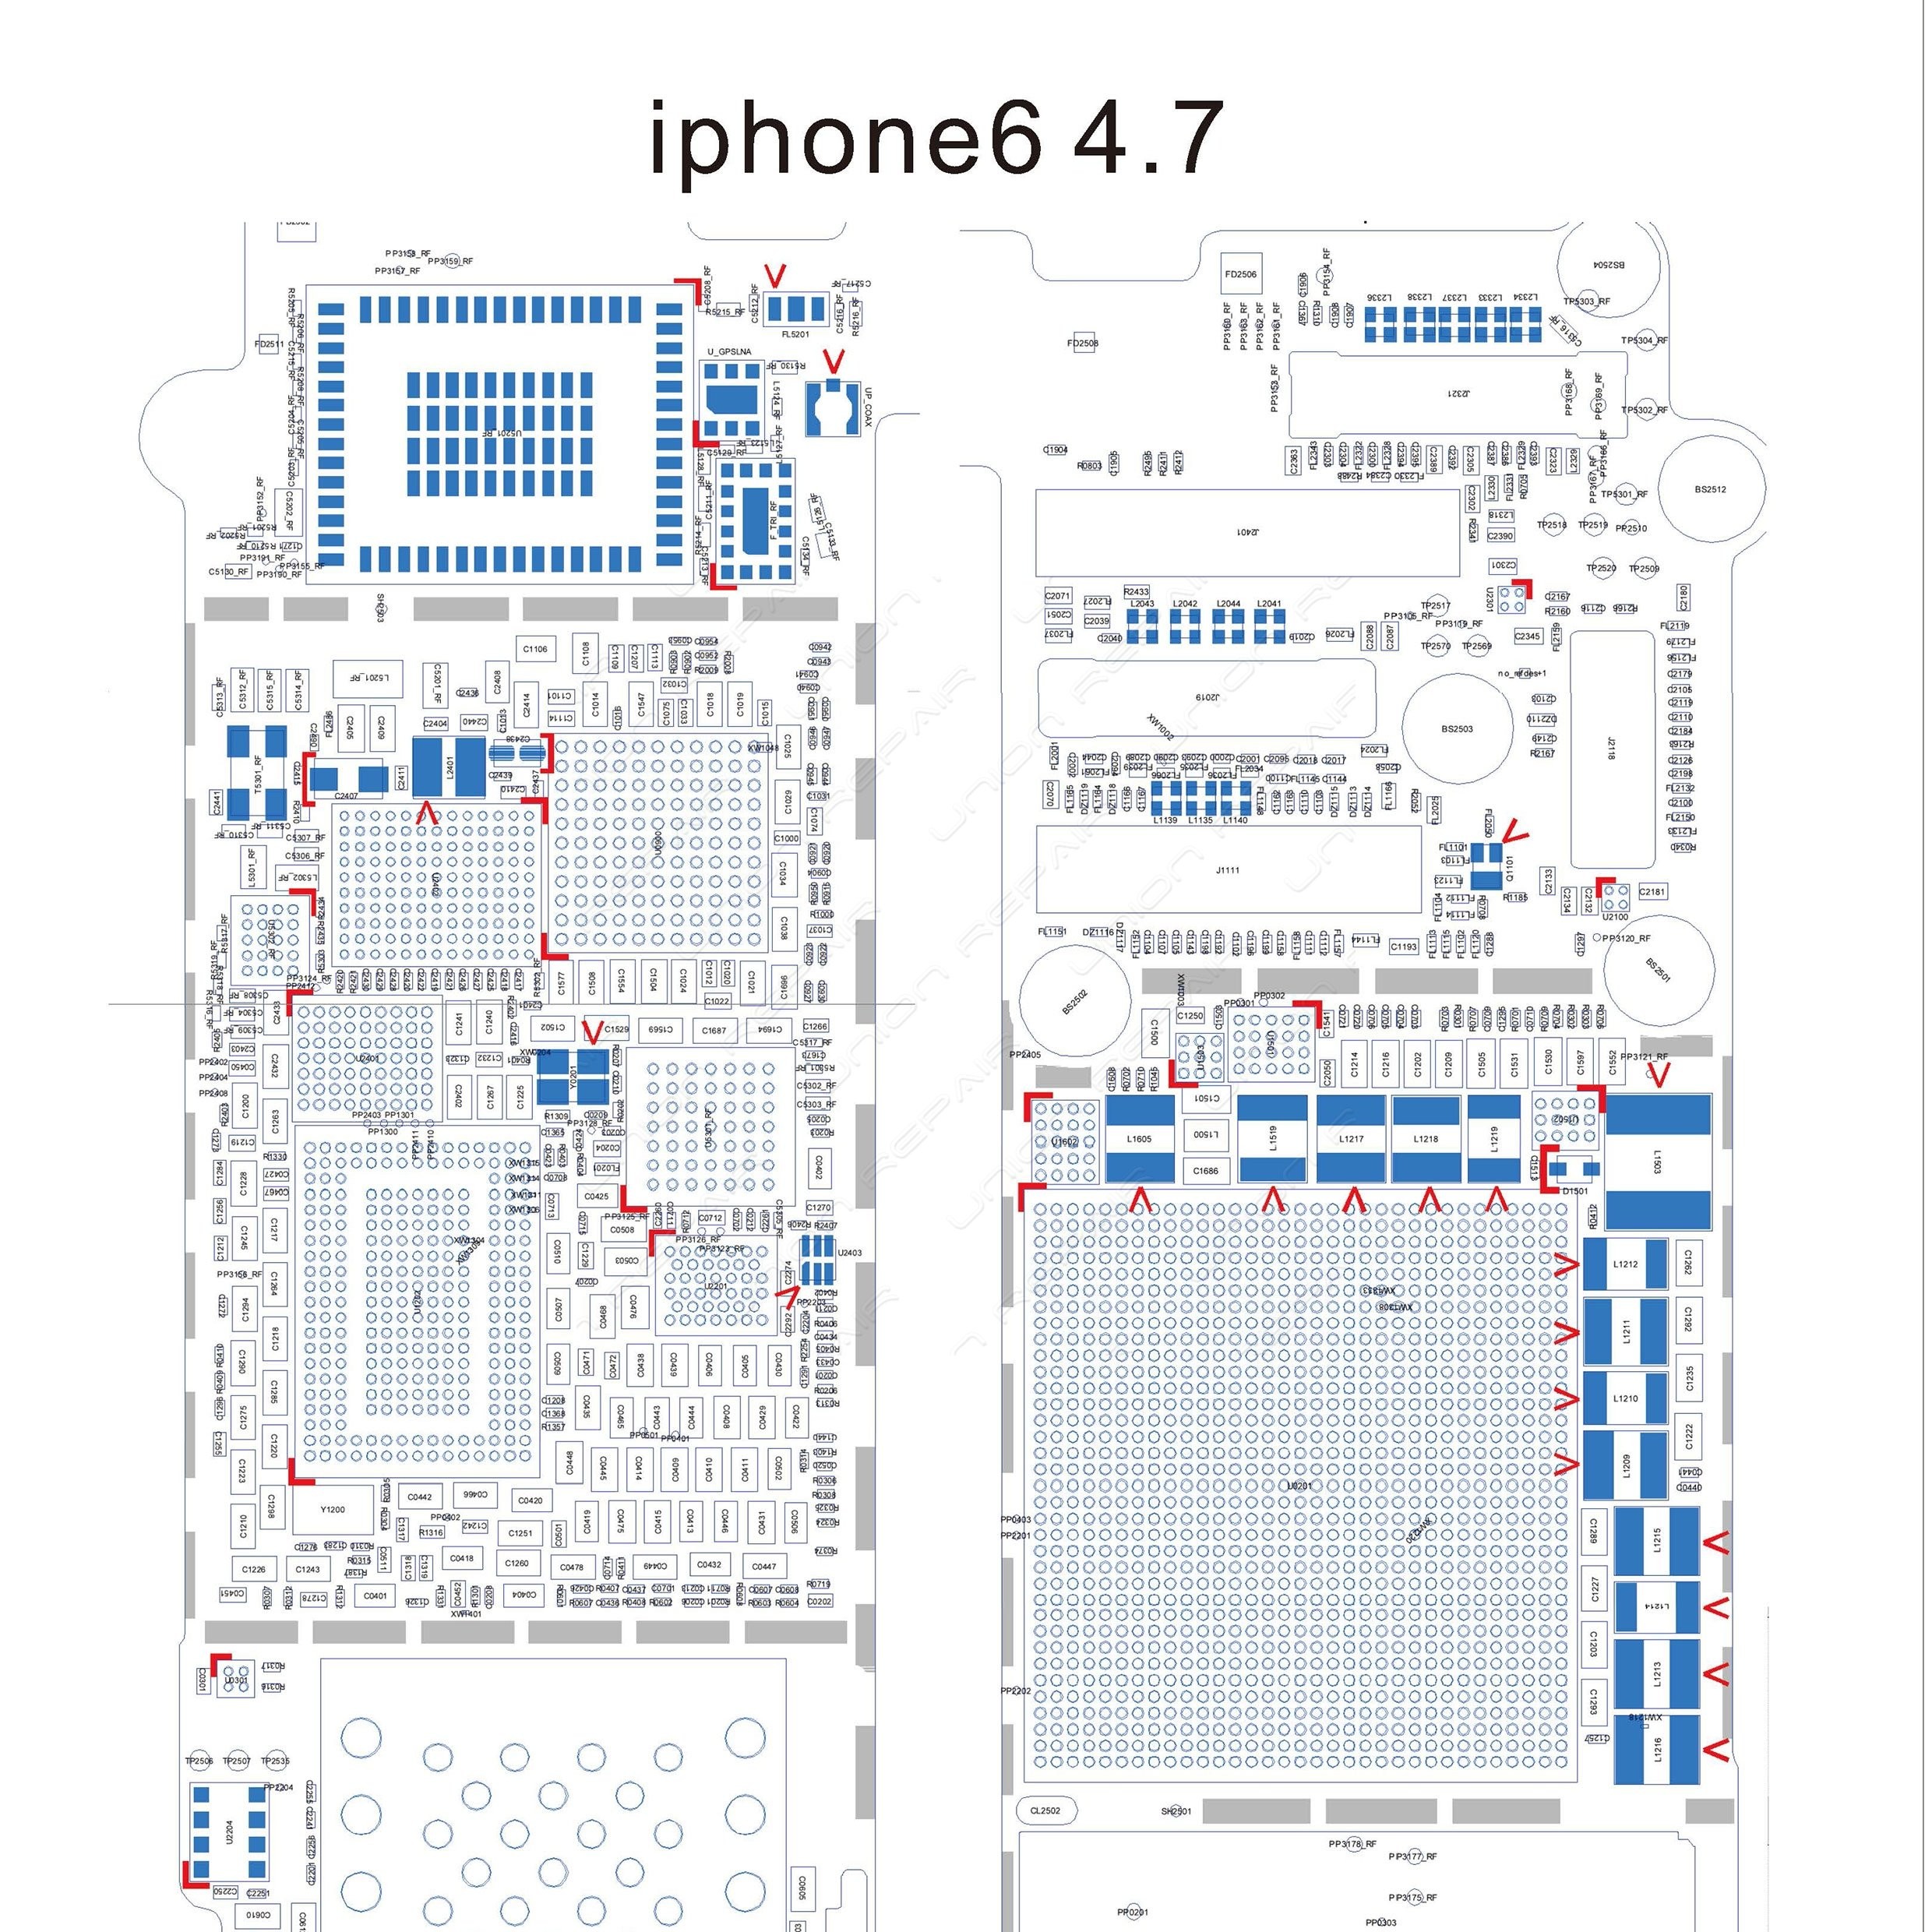 iPhone 6 Plus Schematic Diagram New Popular Circuits Page Next Gr Power Supply Circuit Diagram Wiring